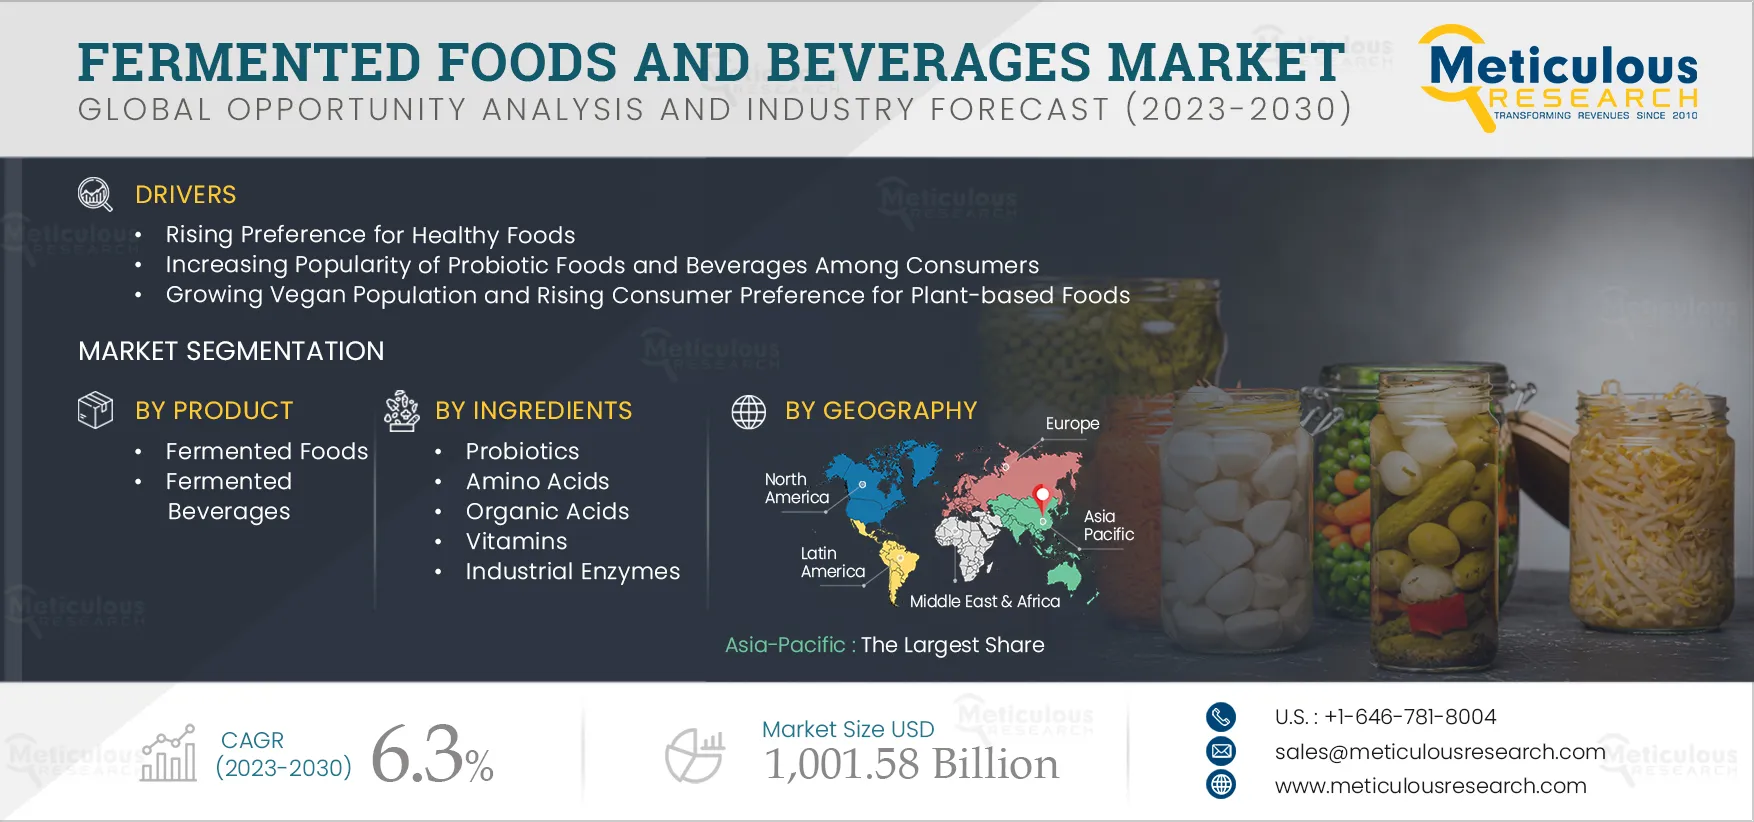  Fermented Foods and Beverages Market